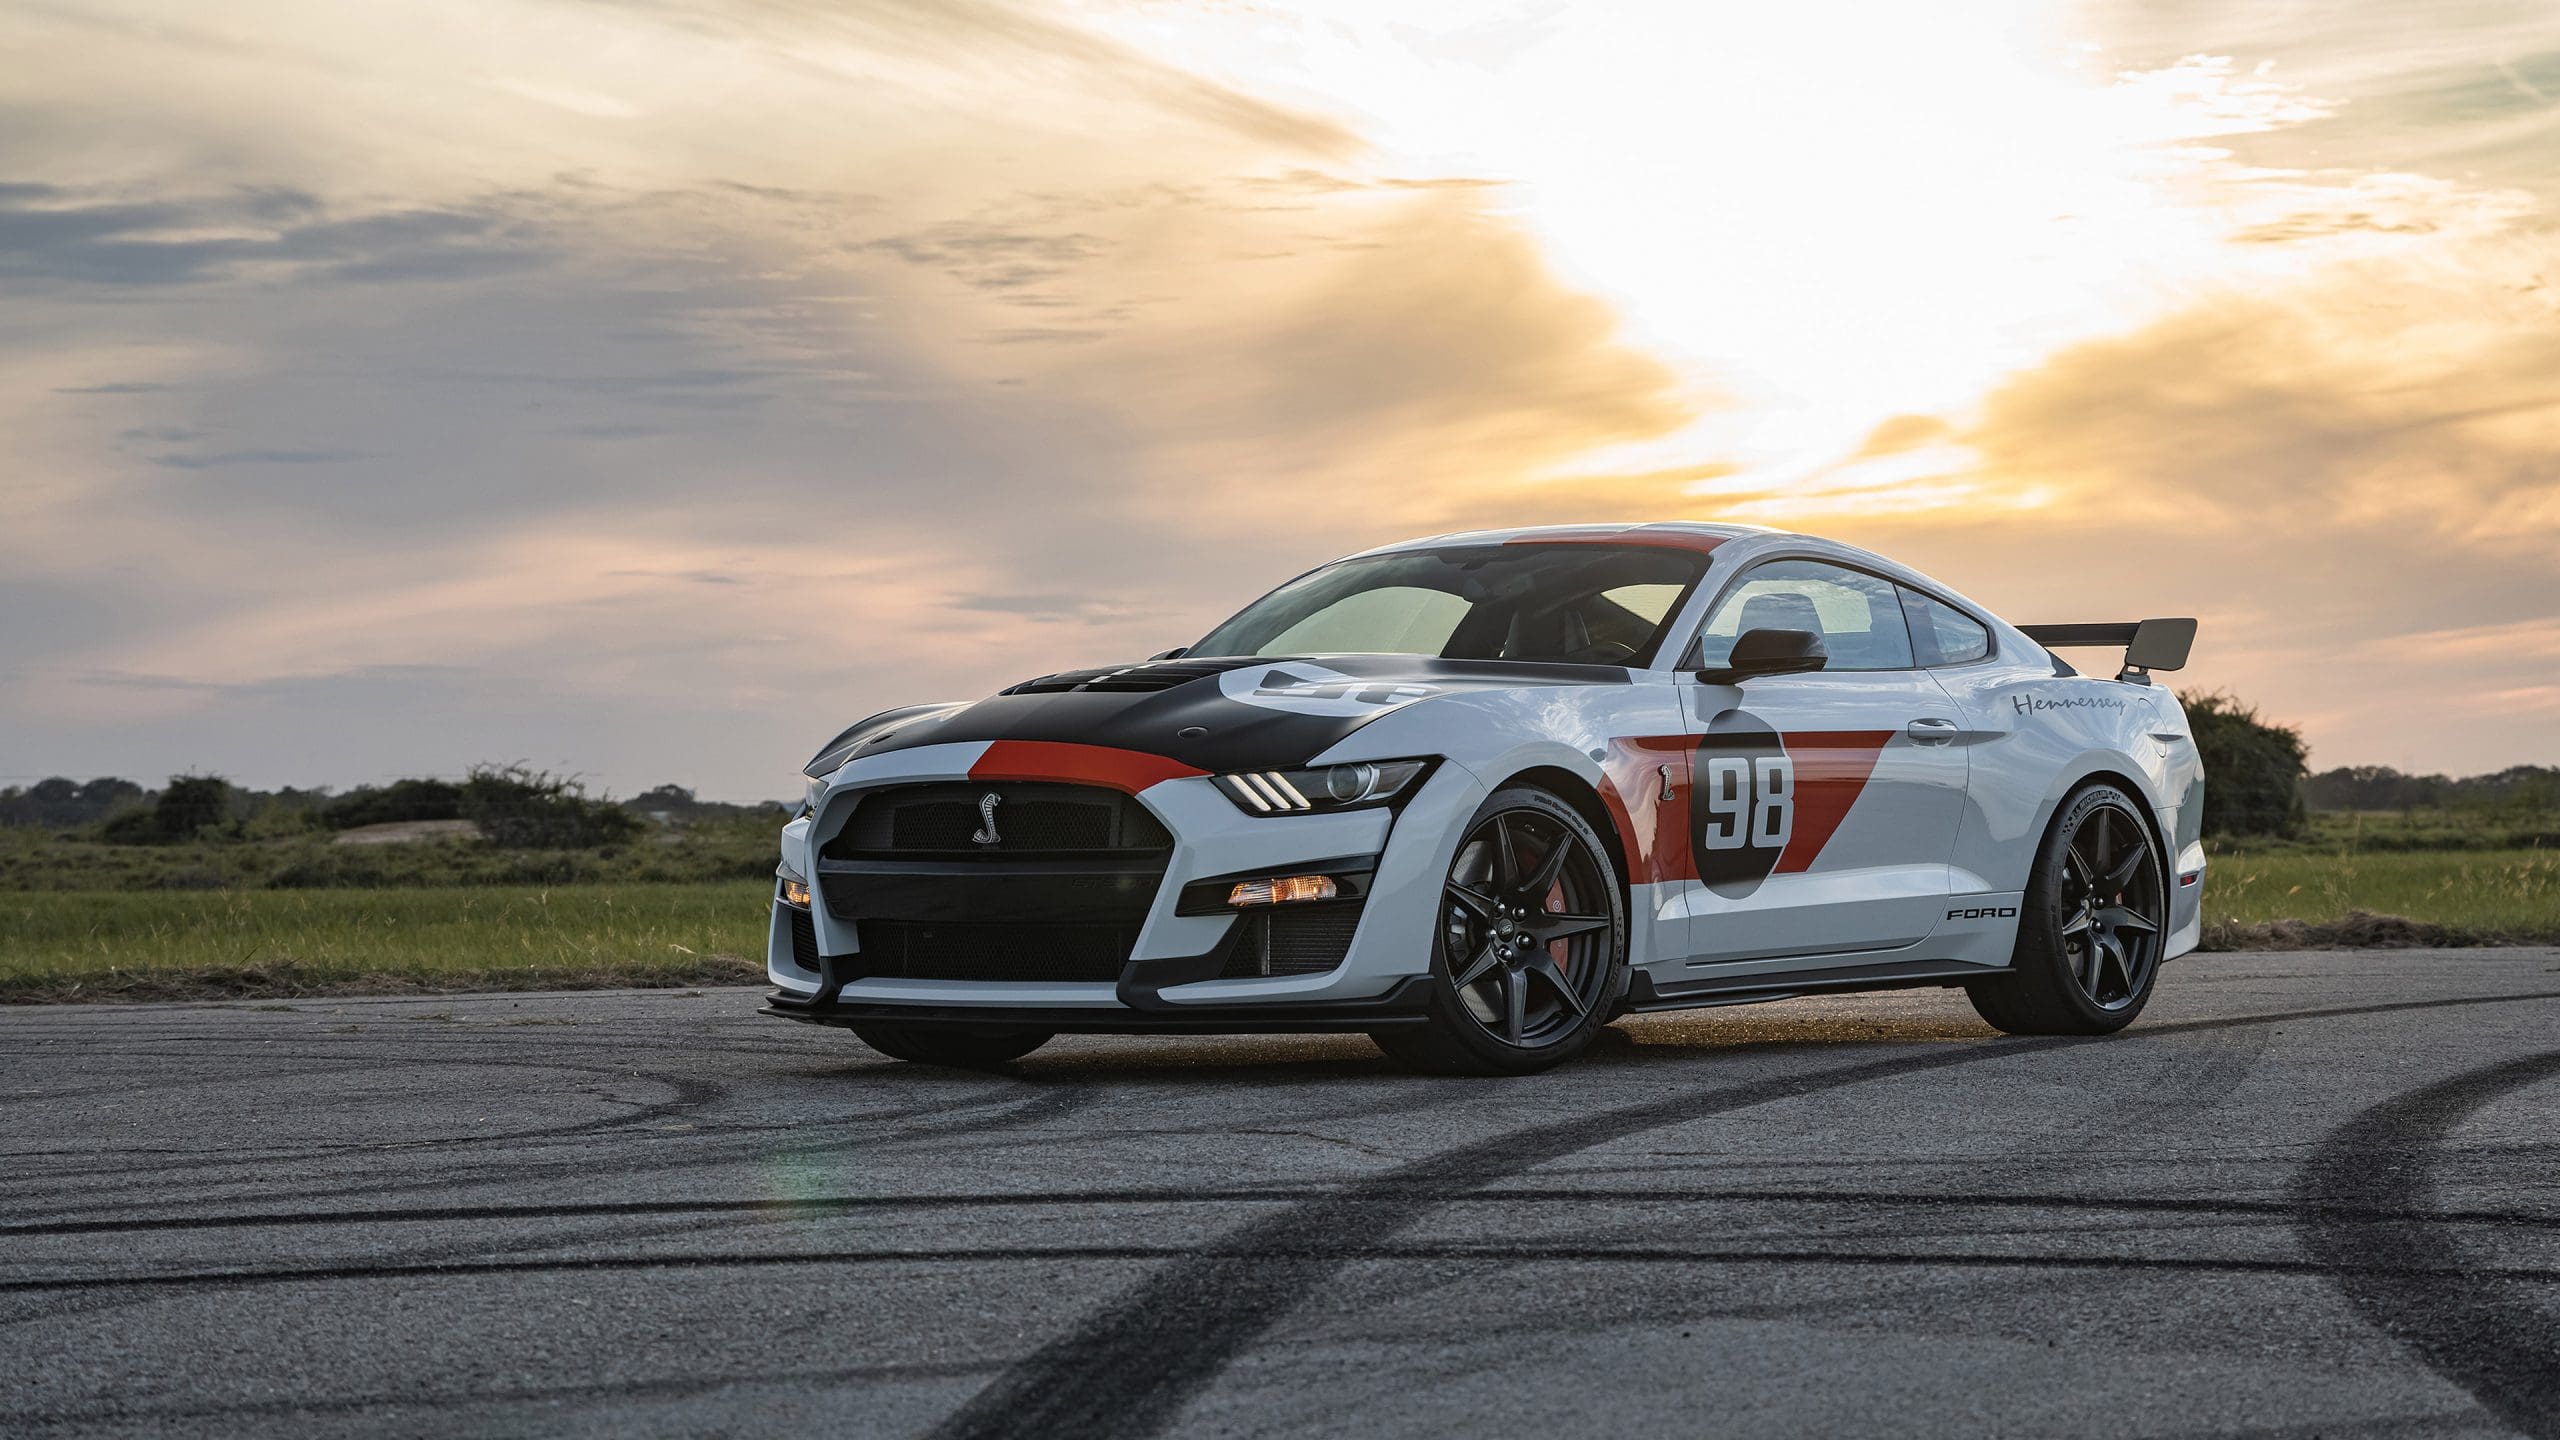 Mustang Of The Day: 2022 Hennessey Venom 1200 Mustang GT500